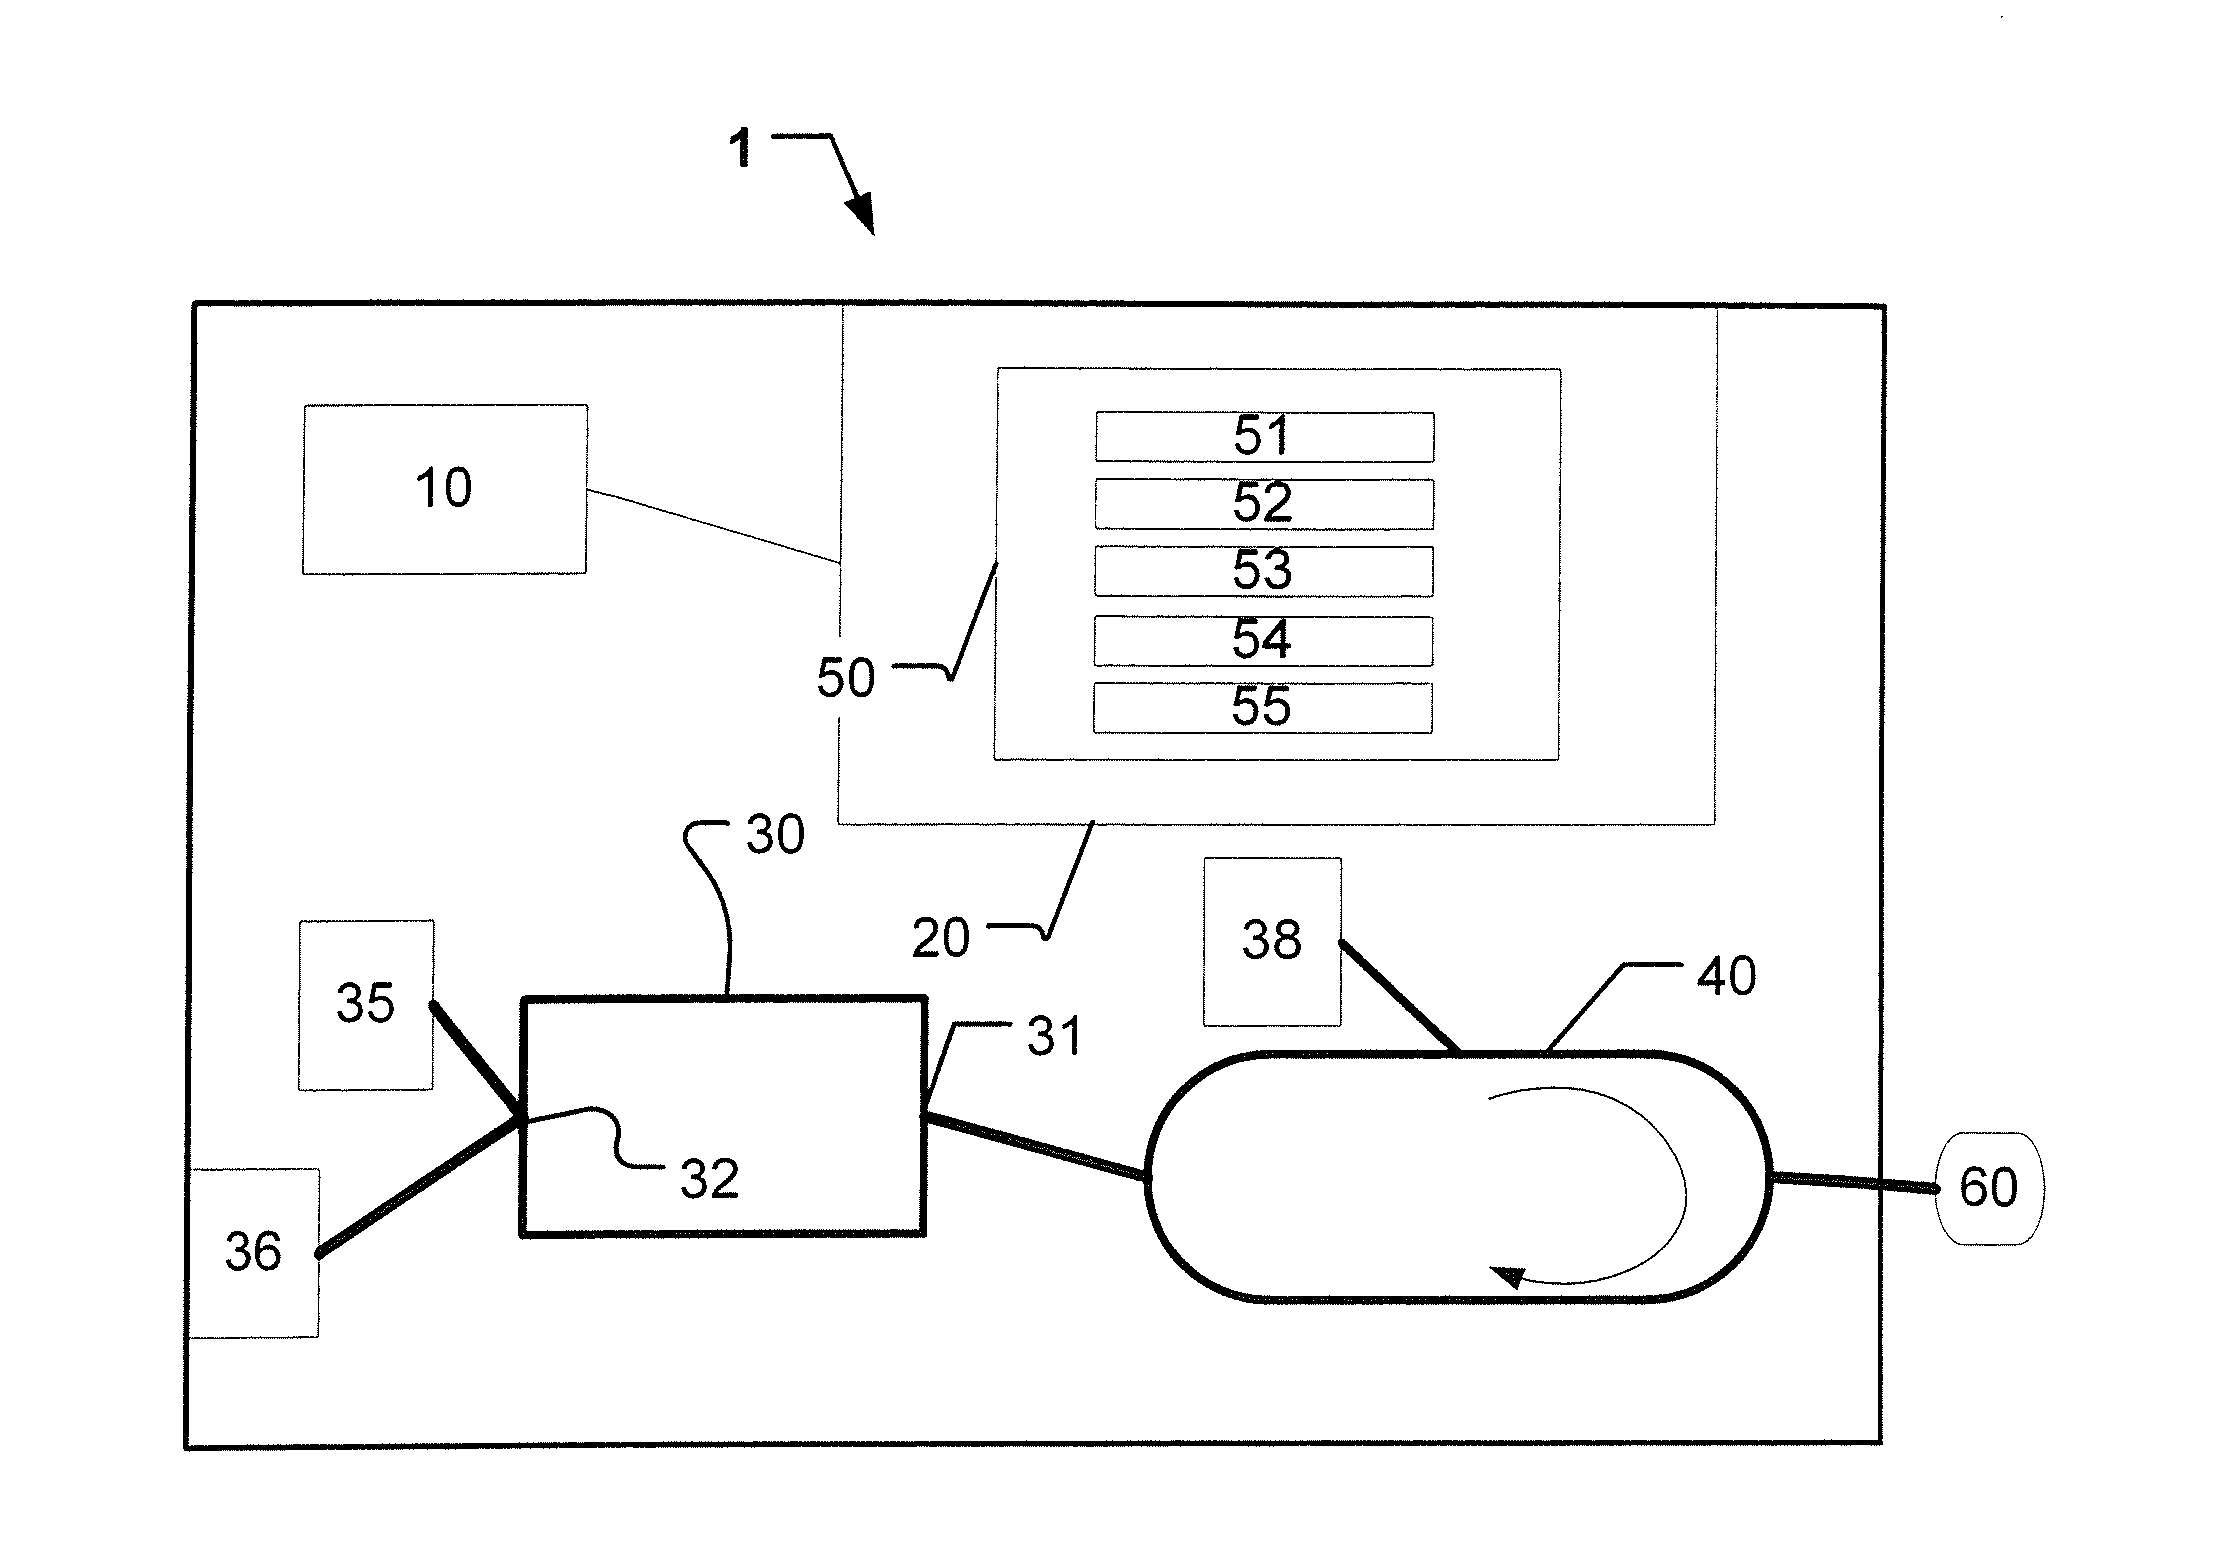 Volume reflector status indicator for anesthesia system